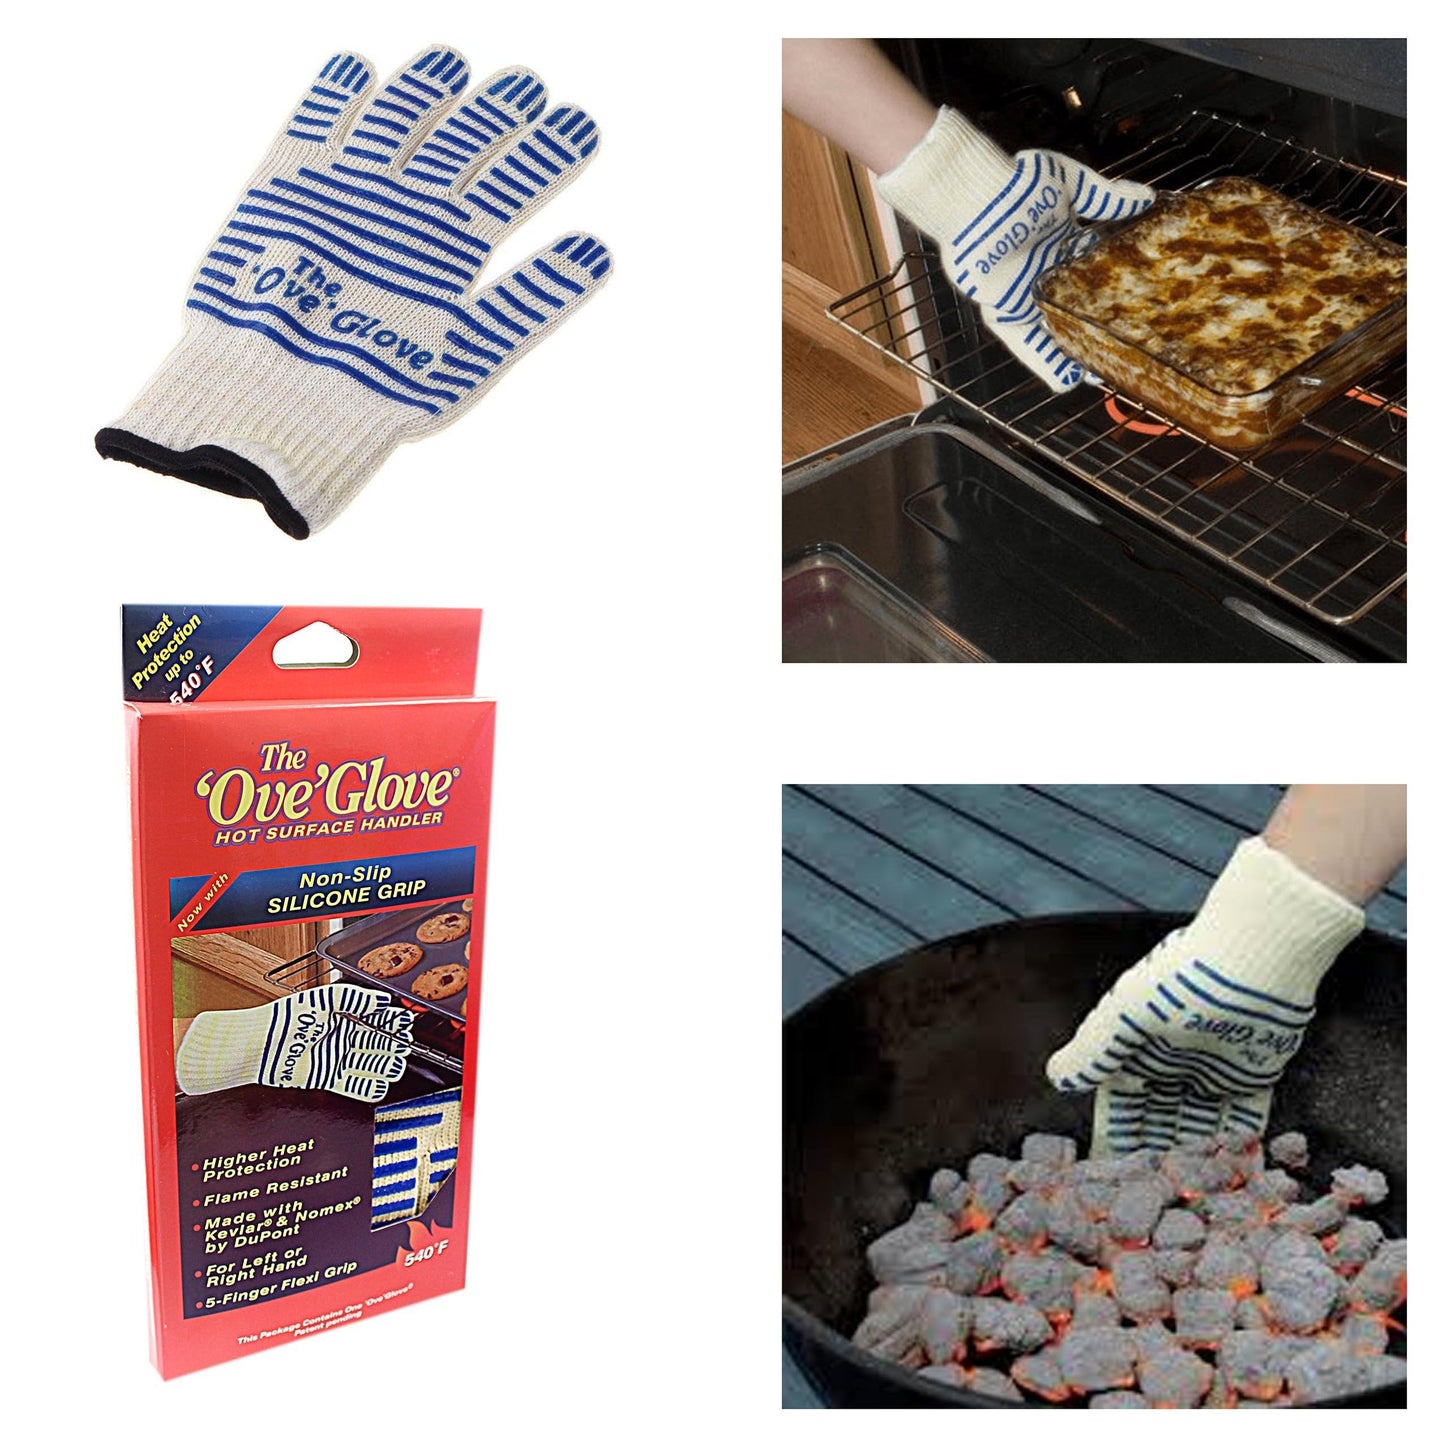 The 'Ove' Glove Heavy Duty Oven Glove Non- Slip Silicone Grip Washable 15cm x 24cm Large 4403 A (Parcel Rate)